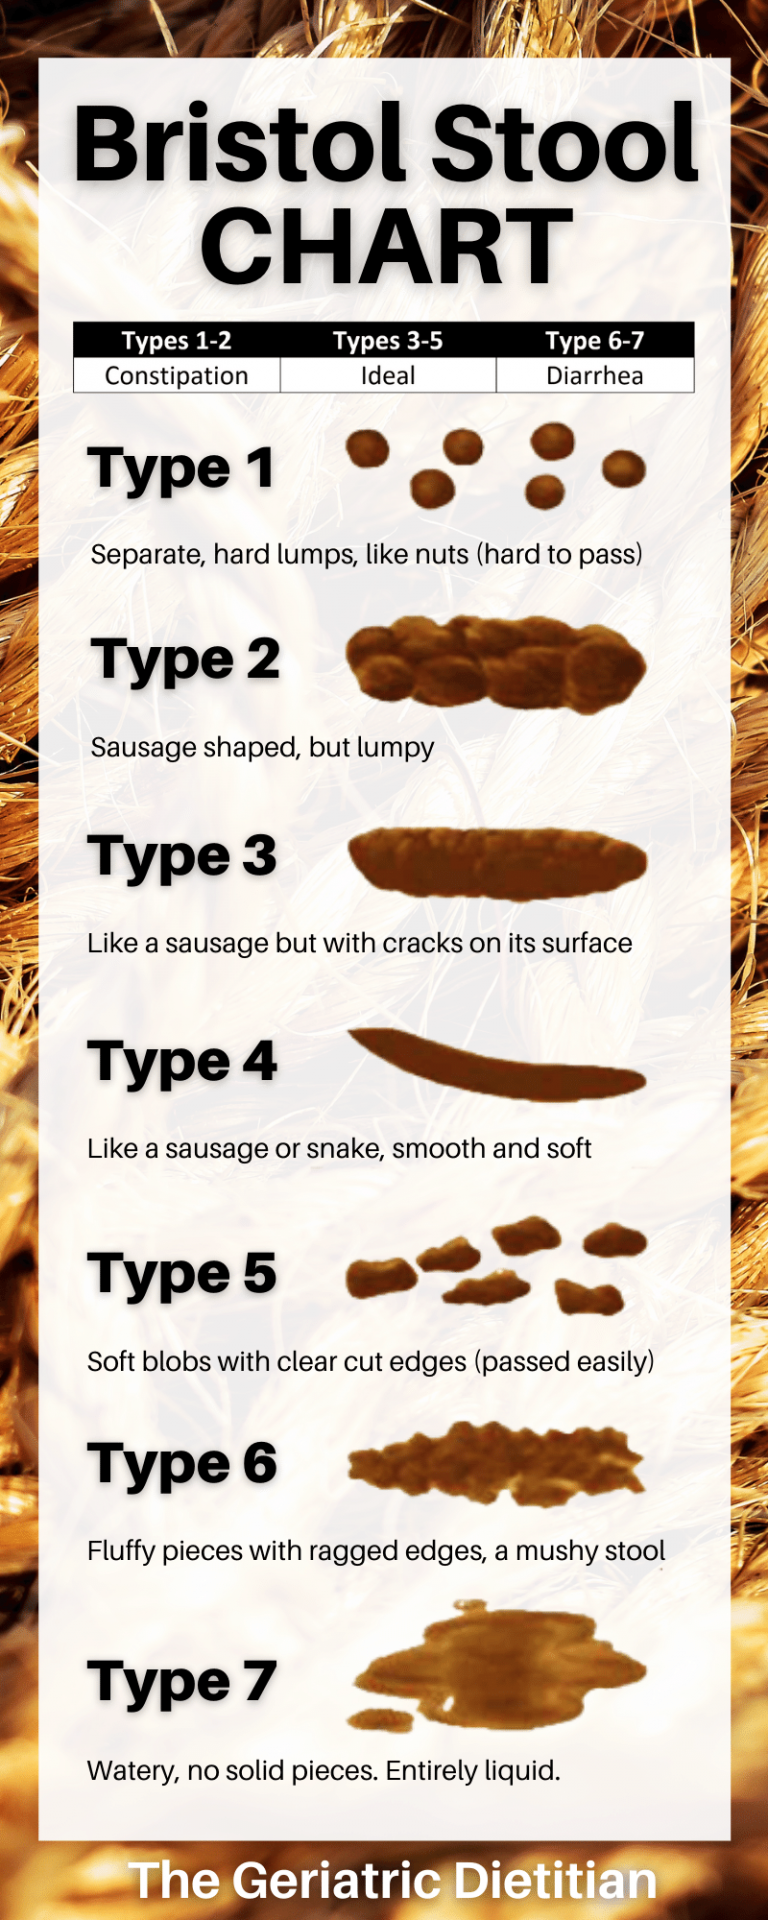 Printable Bristol Stool Chart Types 1 & 2 Meaning And Explanation: